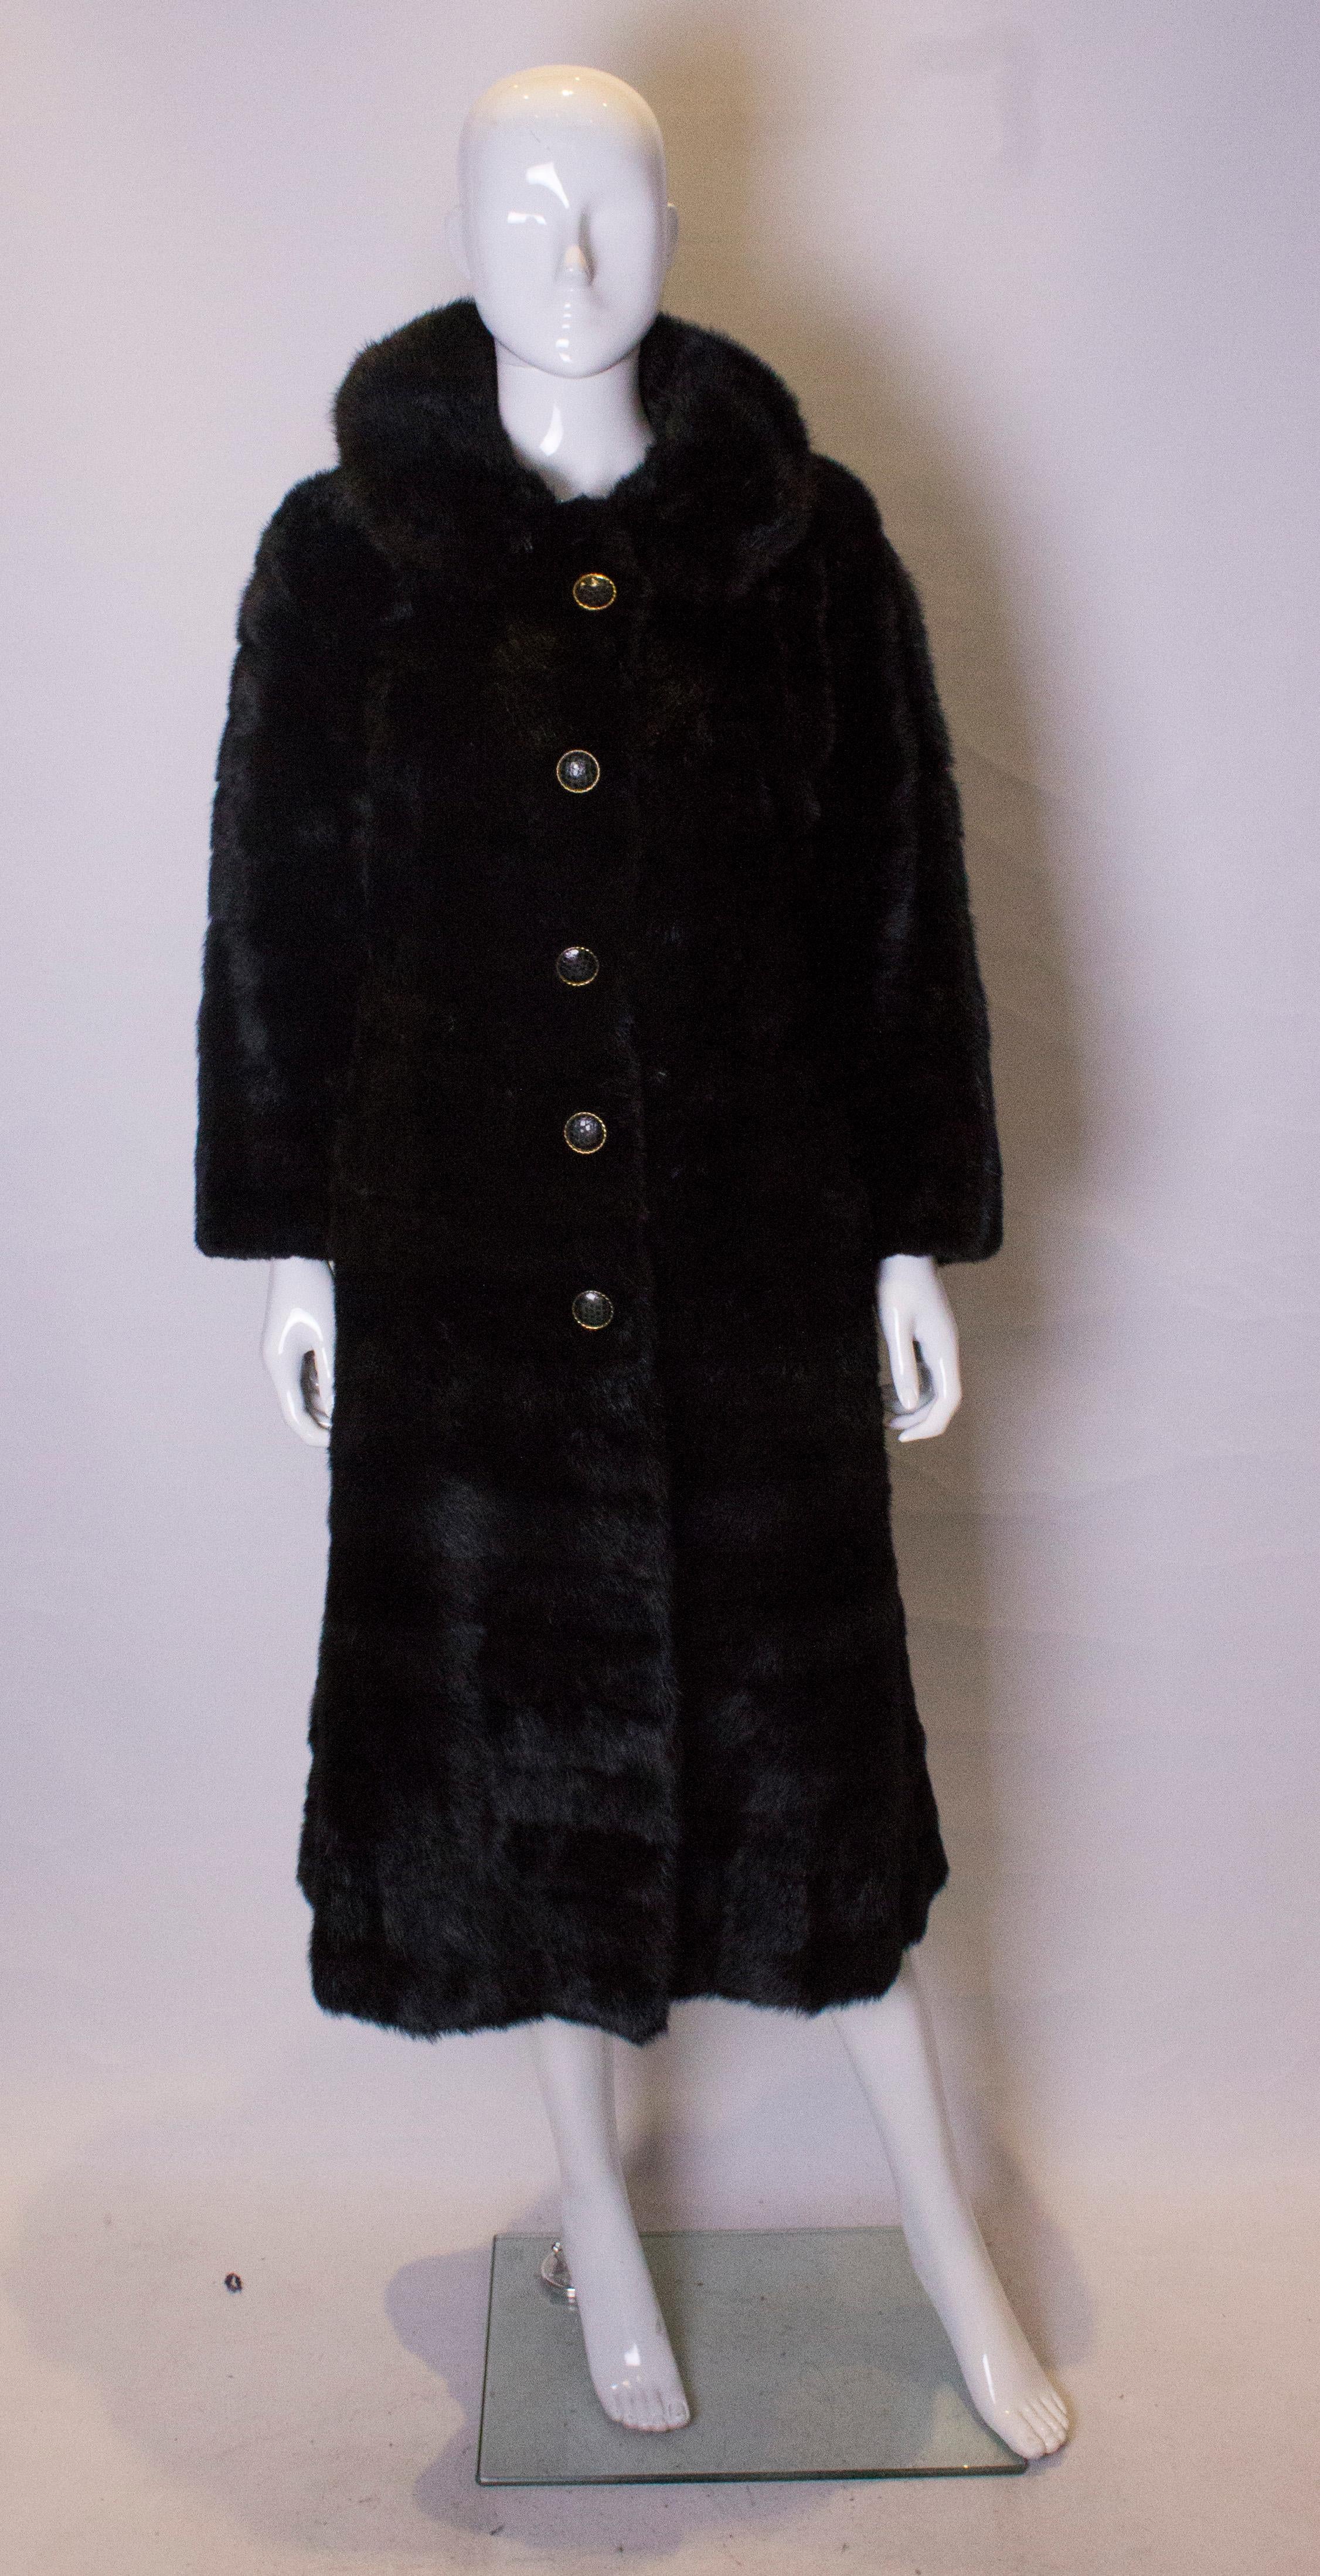 A chic dark mink coat, dating from the 1960s. The coat has a round collar , a five button/hook front fastening, two pockets at the front, and a half belt at the back. It is fully lined.